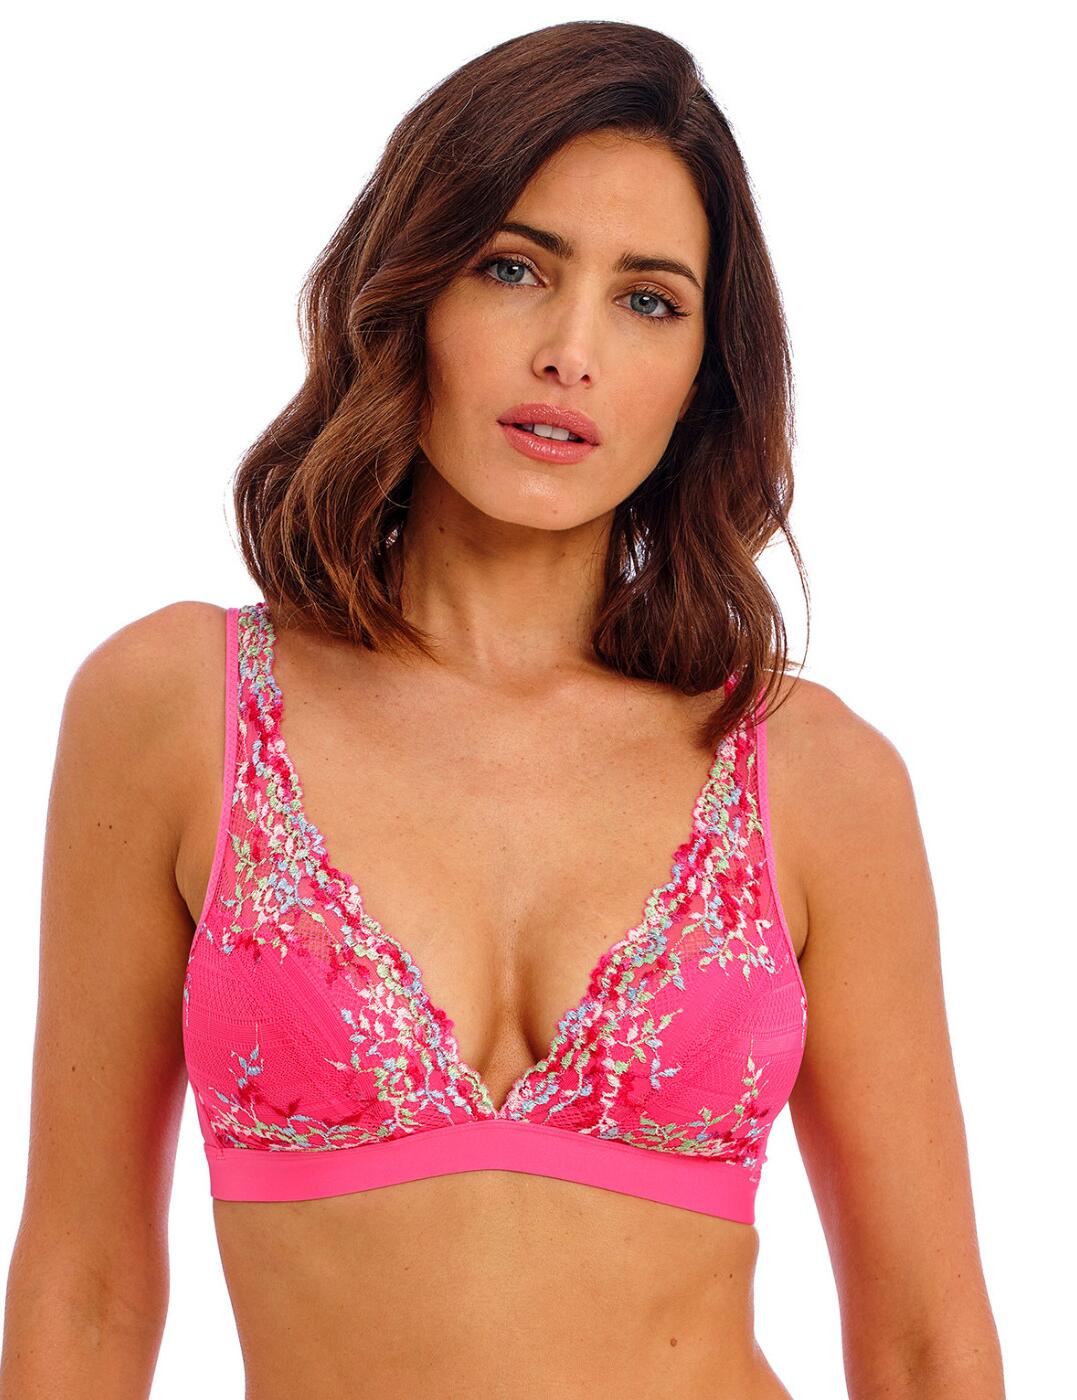 Neon Pink Lace Bralette - Comfortable and Stylish